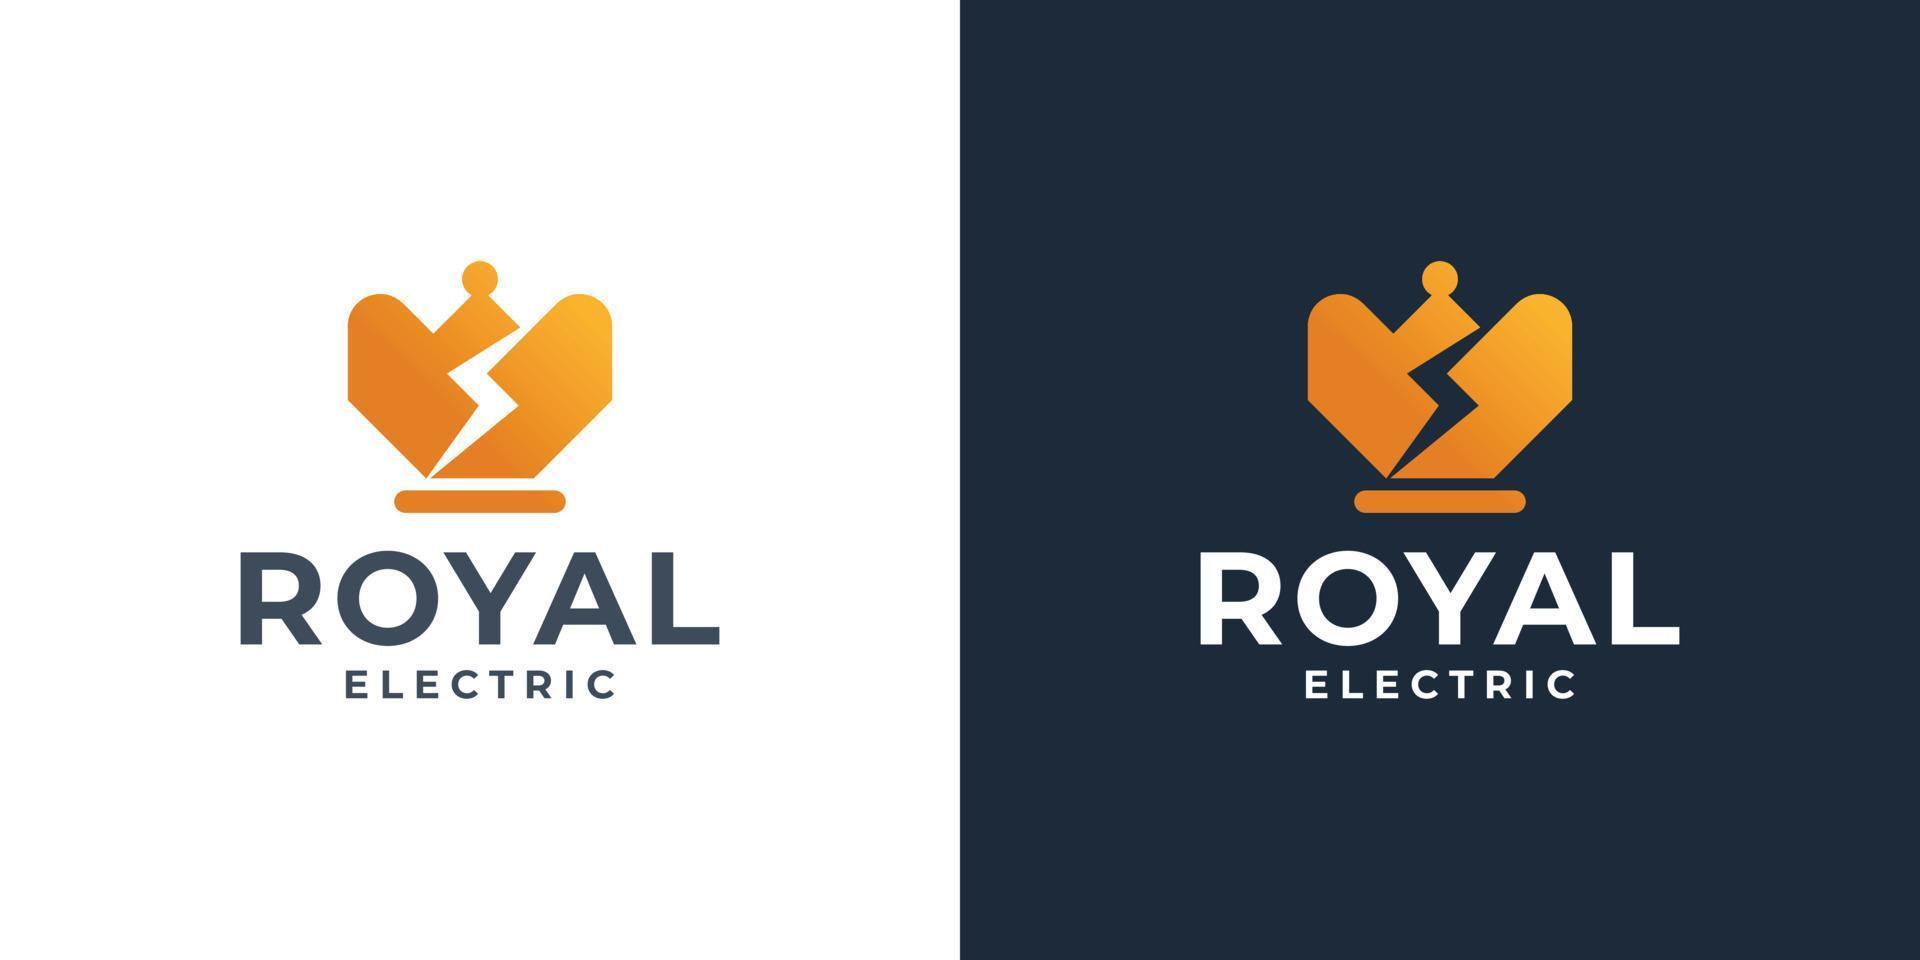 creative logo design shape of the crown is combined with light or electric design flat concept. vector